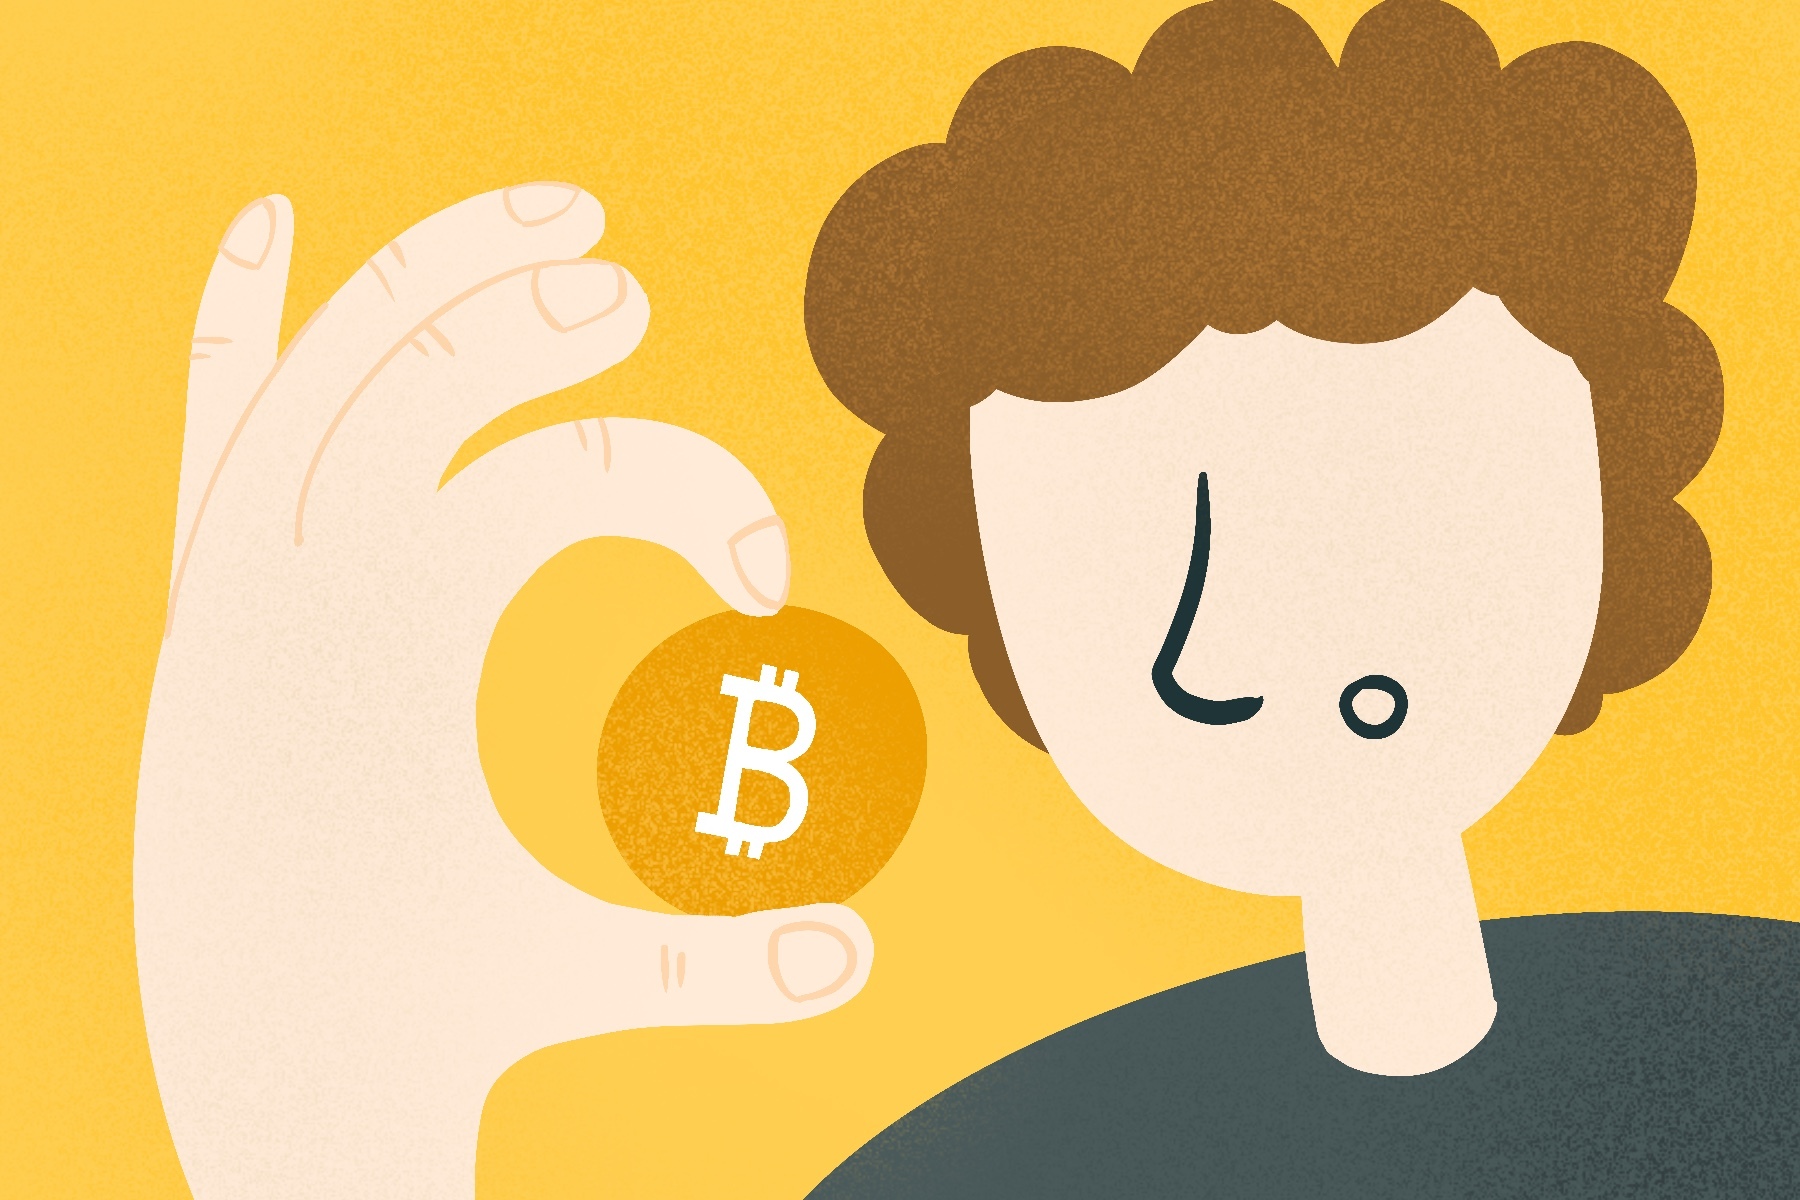 An illustration of a person holding a Bitcoin for an article about Bitcoin and NFTs. (Illustration by Sonja Vasiljeva, San Jose State University)